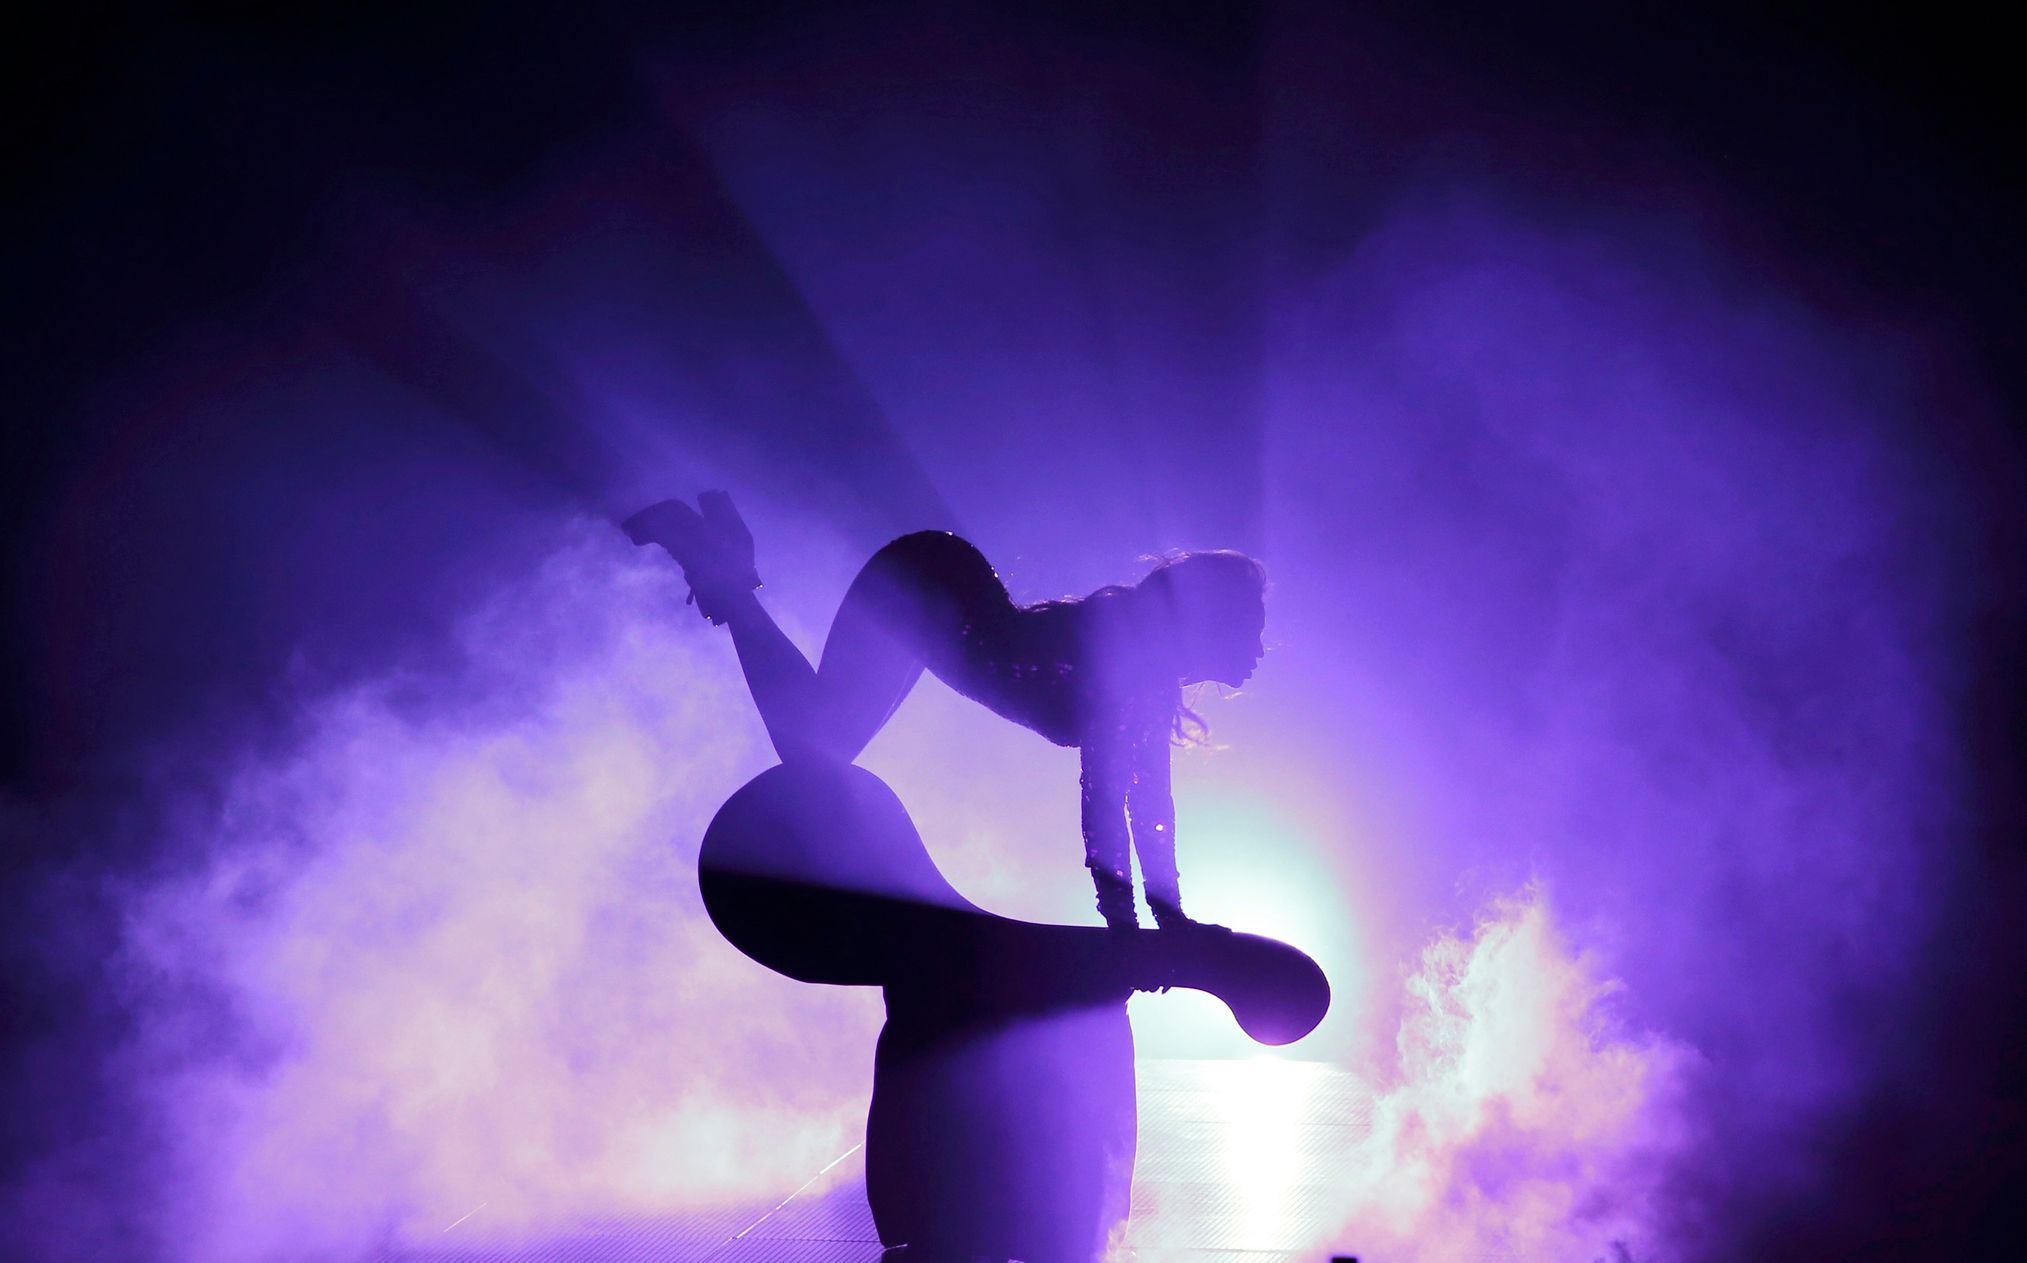 Beyonce performs a medley of songs on stage during the 2014 MTV Video Music Awards in Inglewood